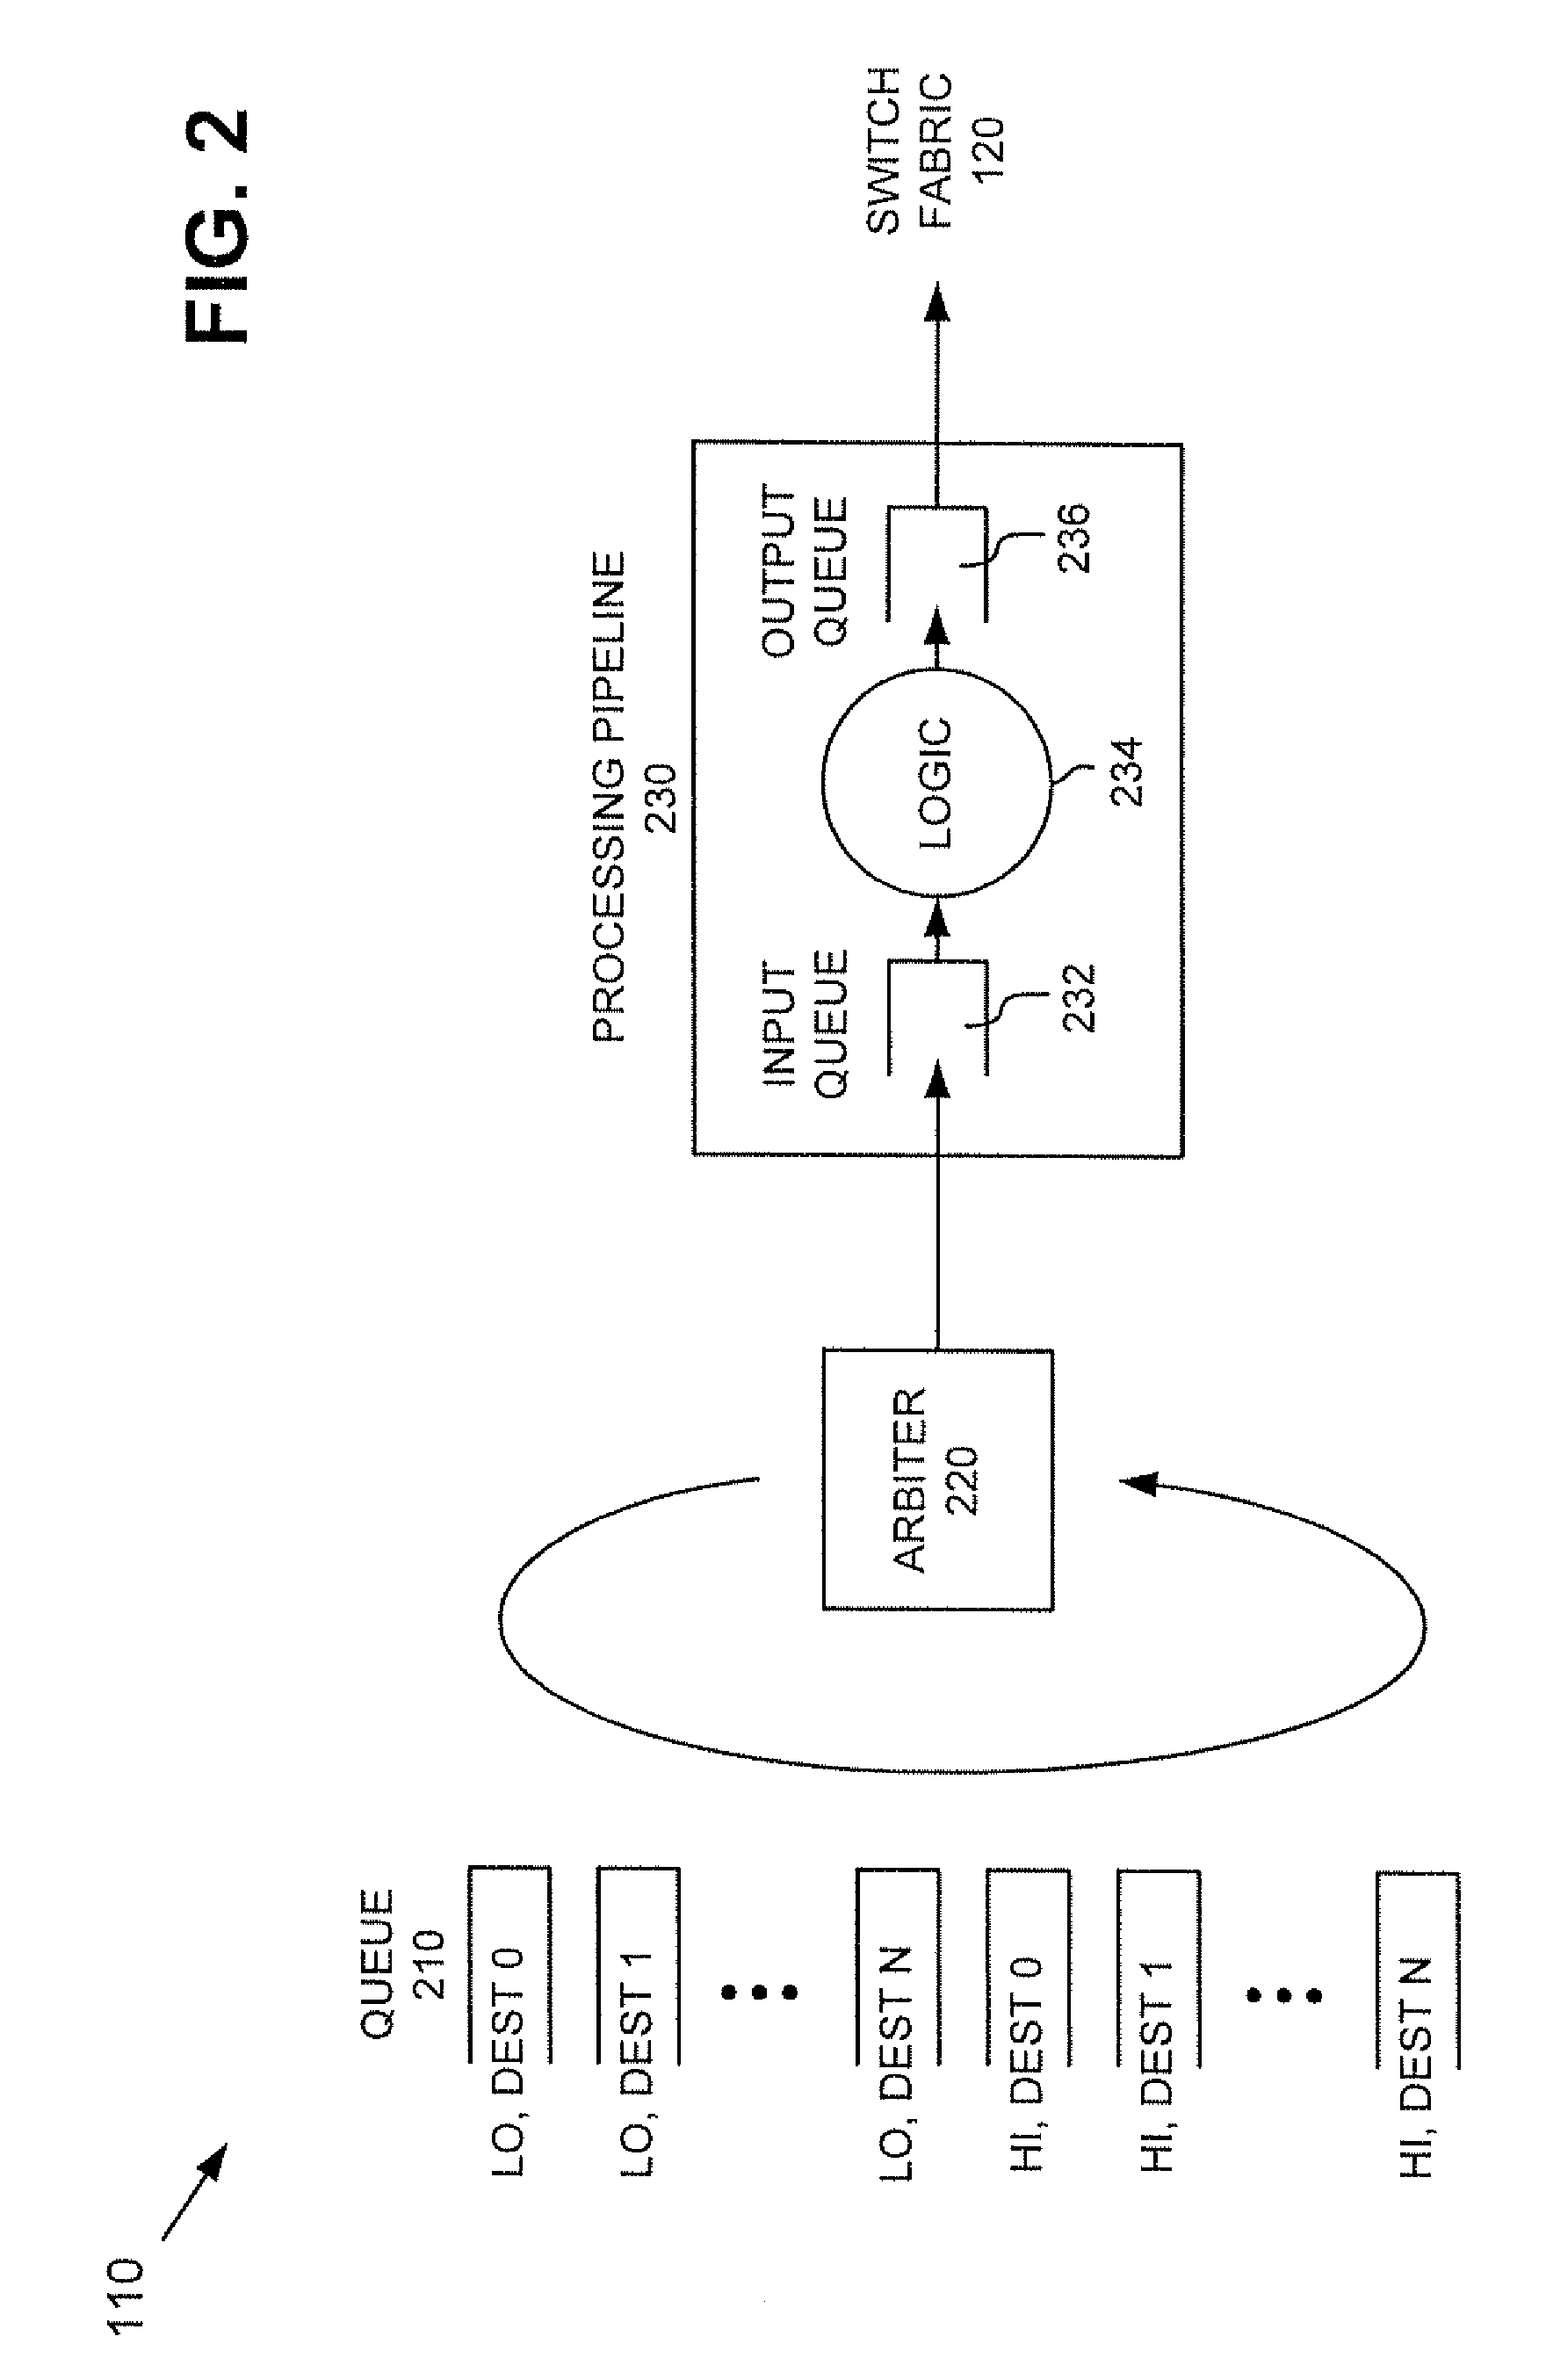 Packet prioritization systems and methods using address aliases